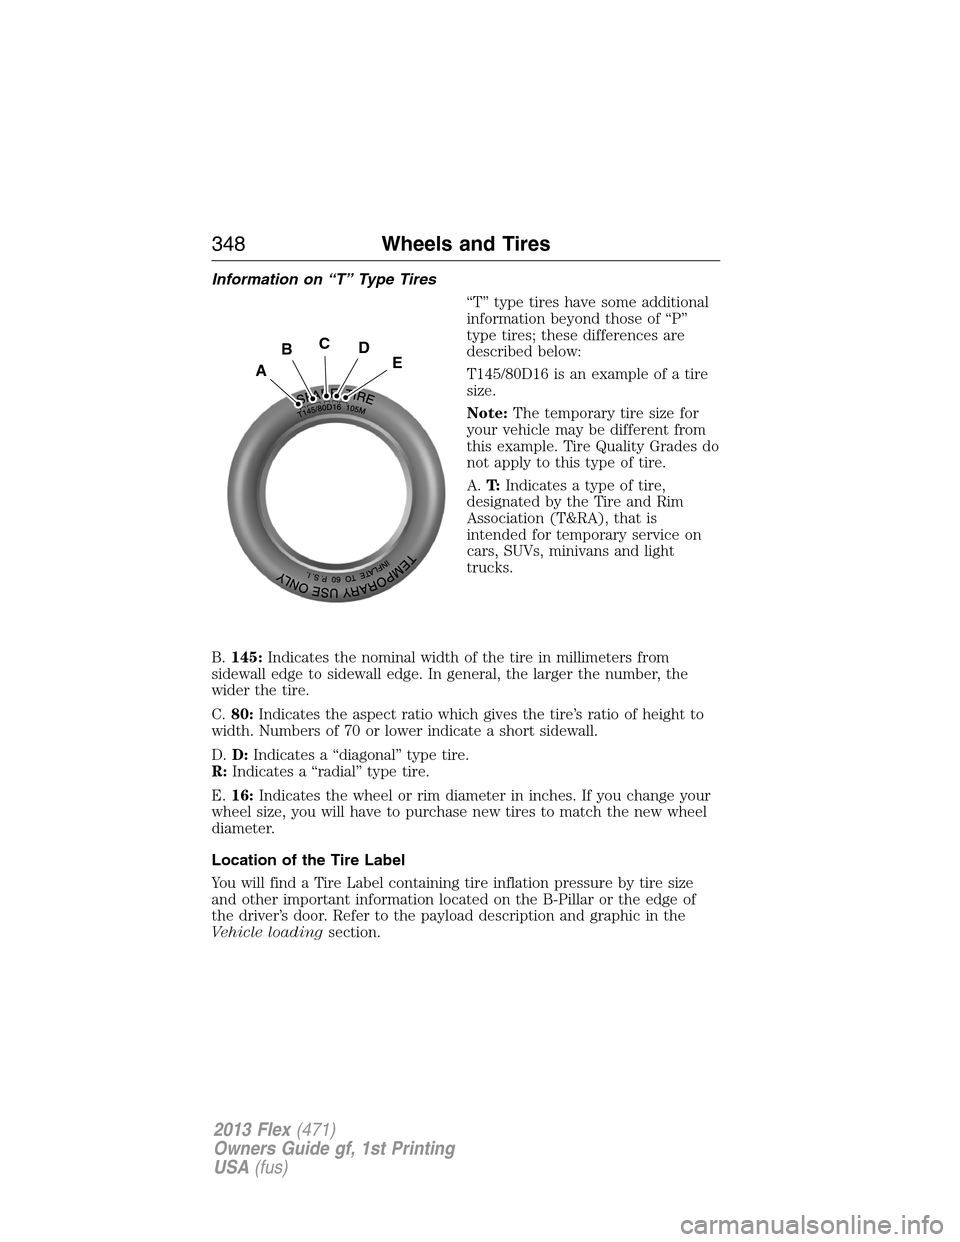 FORD FLEX 2013 1.G Owners Manual Information on “T” Type Tires
“T” type tires have some additional
information beyond those of “P”
type tires; these differences are
described below:
T145/80D16 is an example of a tire
size